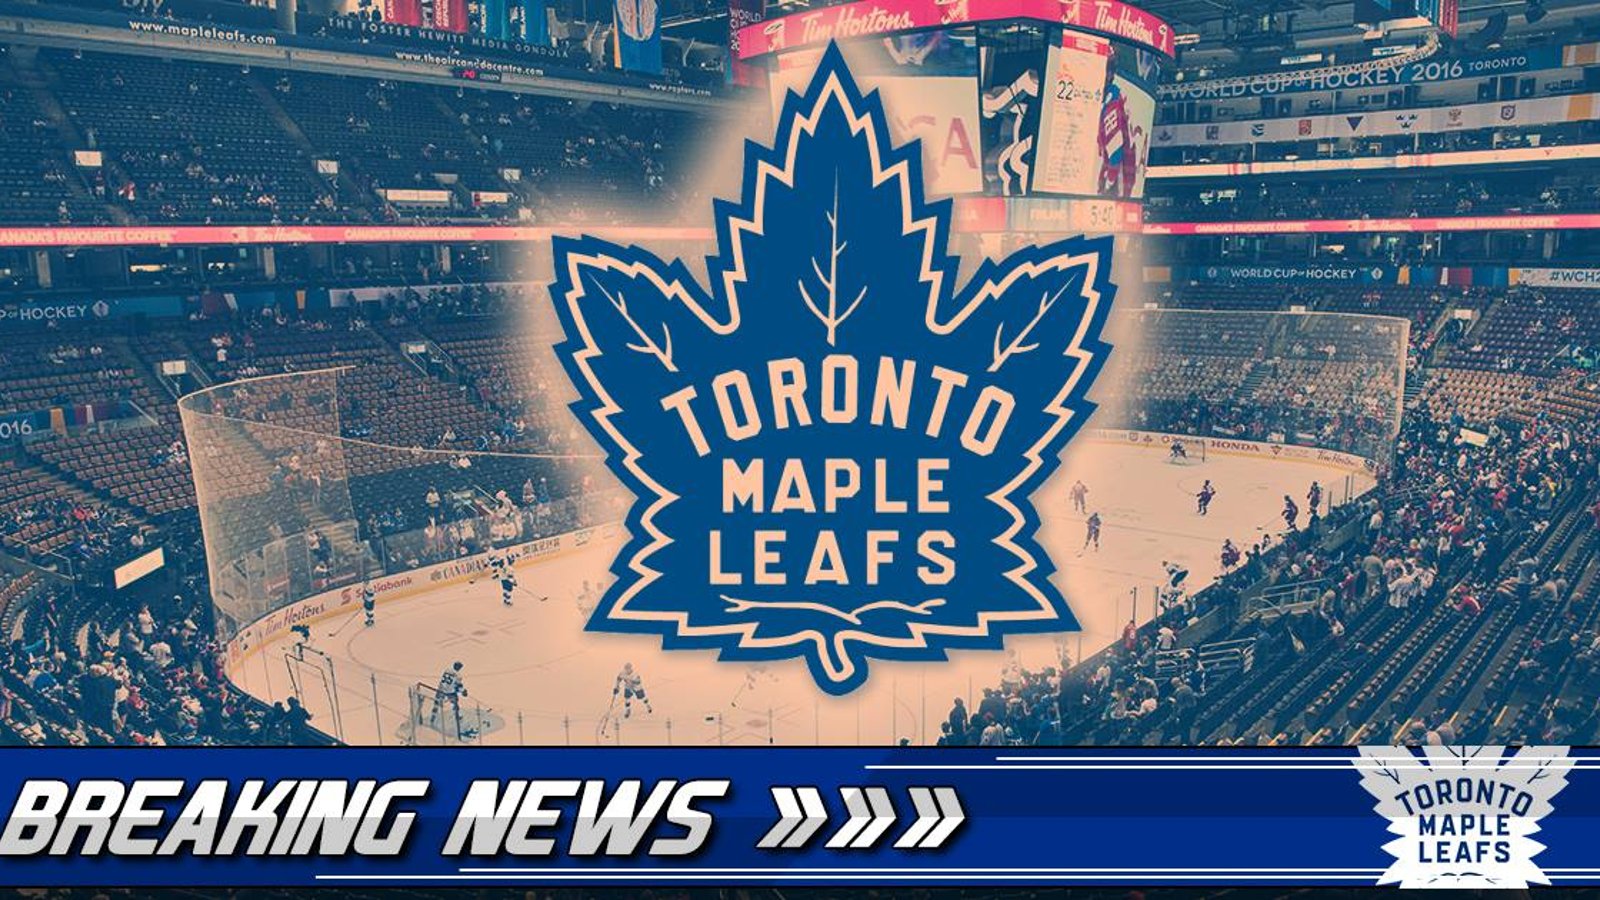 Breaking: Maple Leafs sign young prospect after two 100+ point seasons.